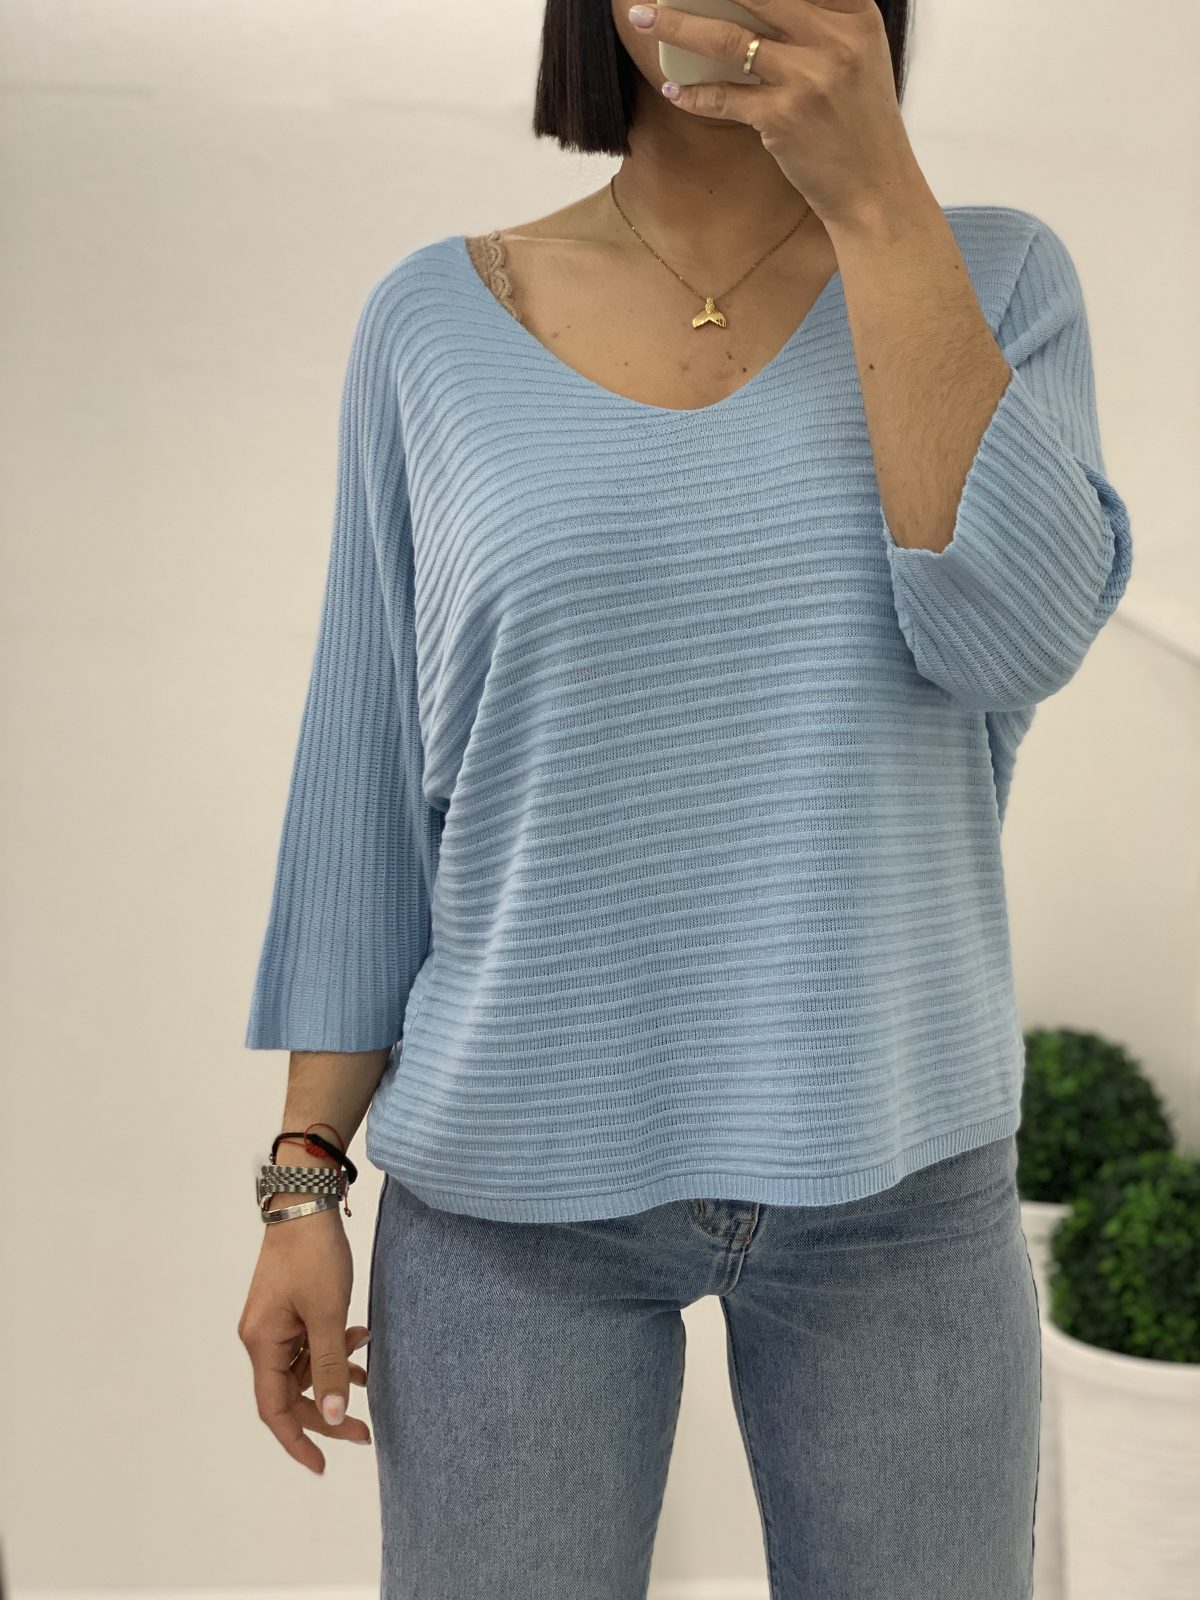 Thin cotton blouse with neckline in blue color